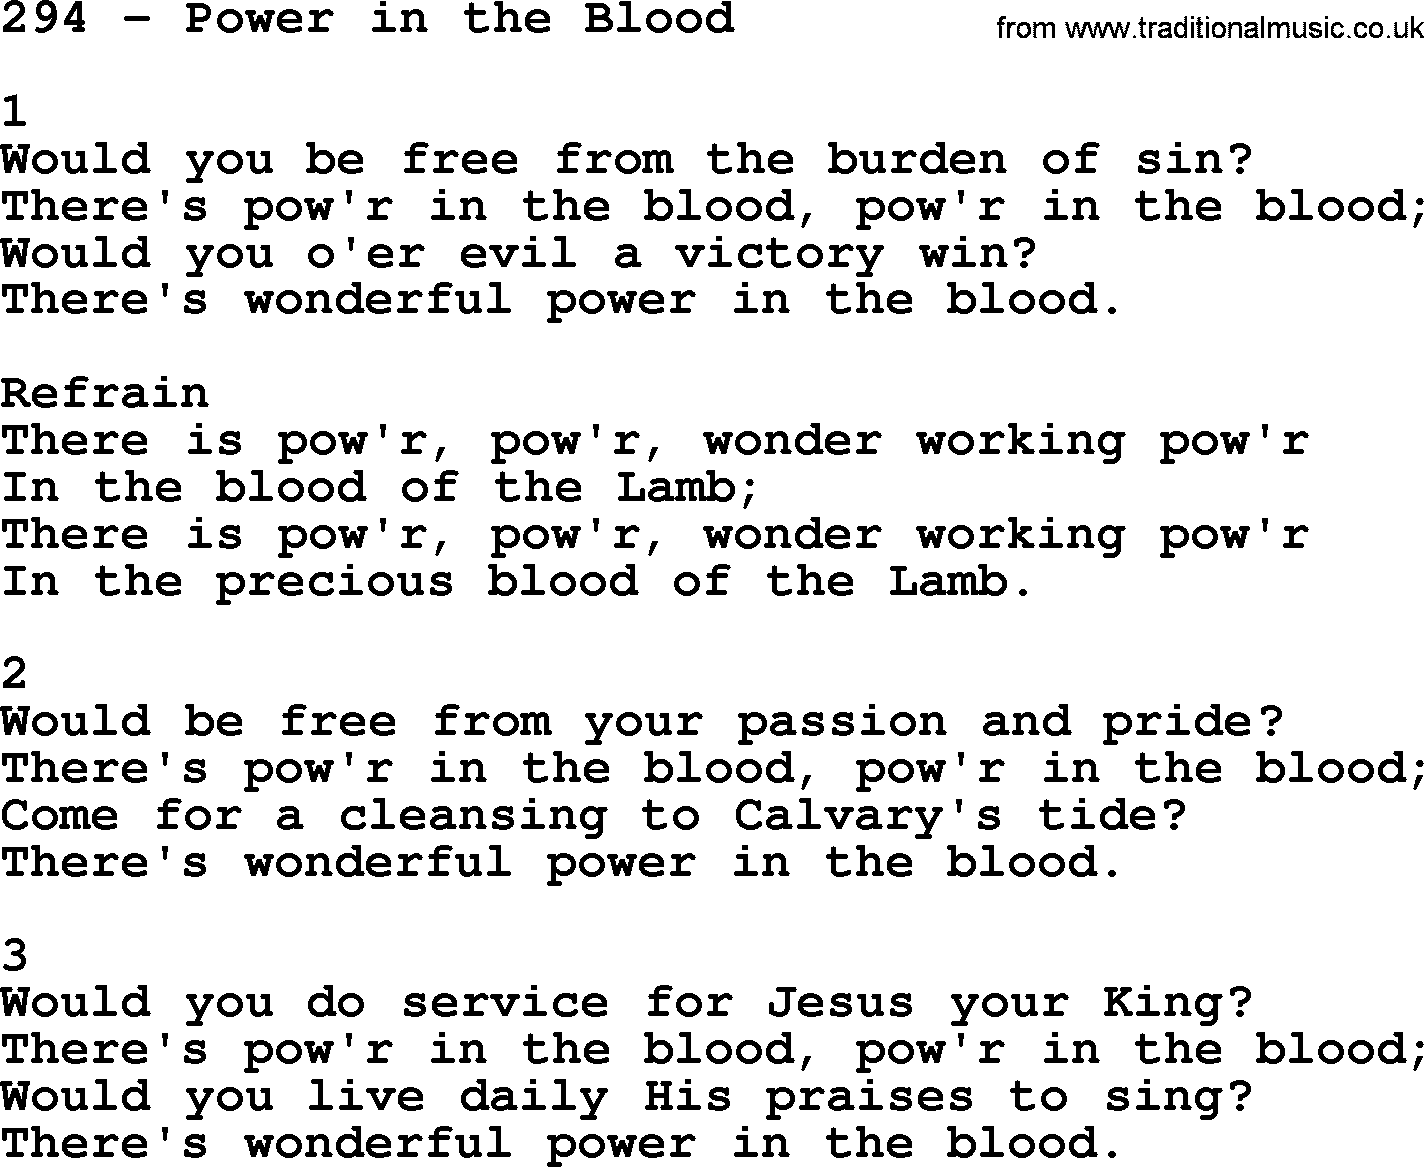 Complete Adventis Hymnal, title: 294-Power In The Blood, with lyrics, midi, mp3, powerpoints(PPT) and PDF,